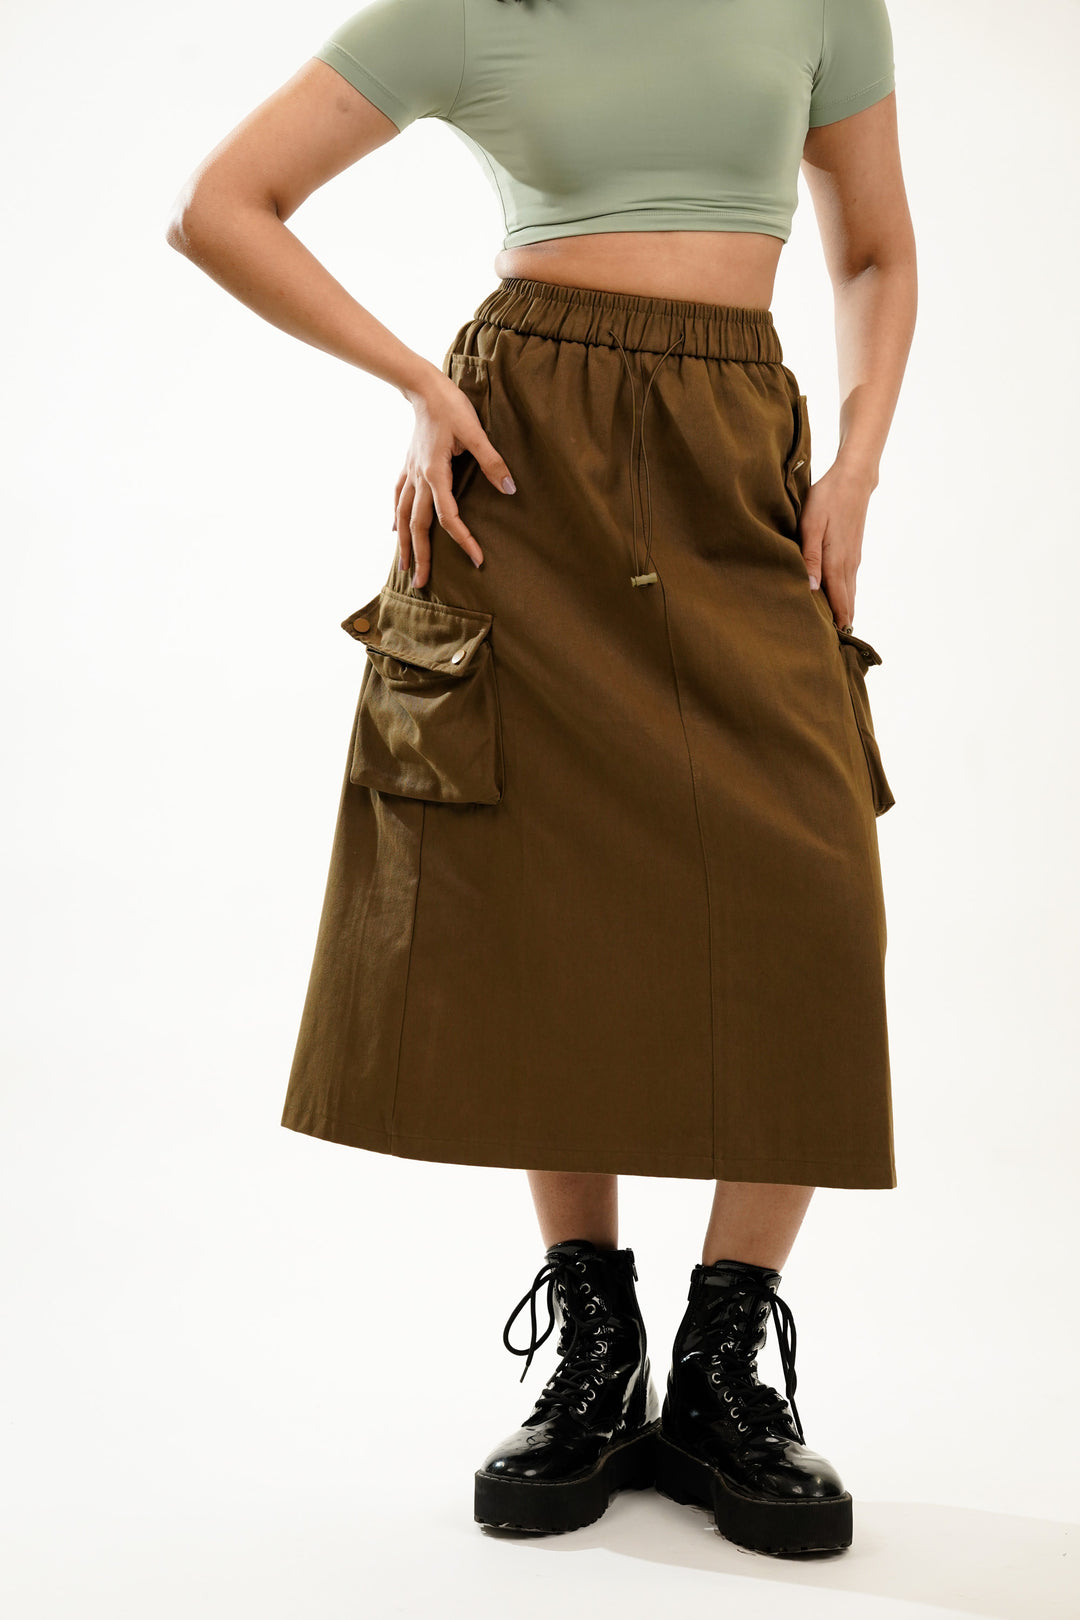 Streetstyle army green cargo skirt with flap pockets